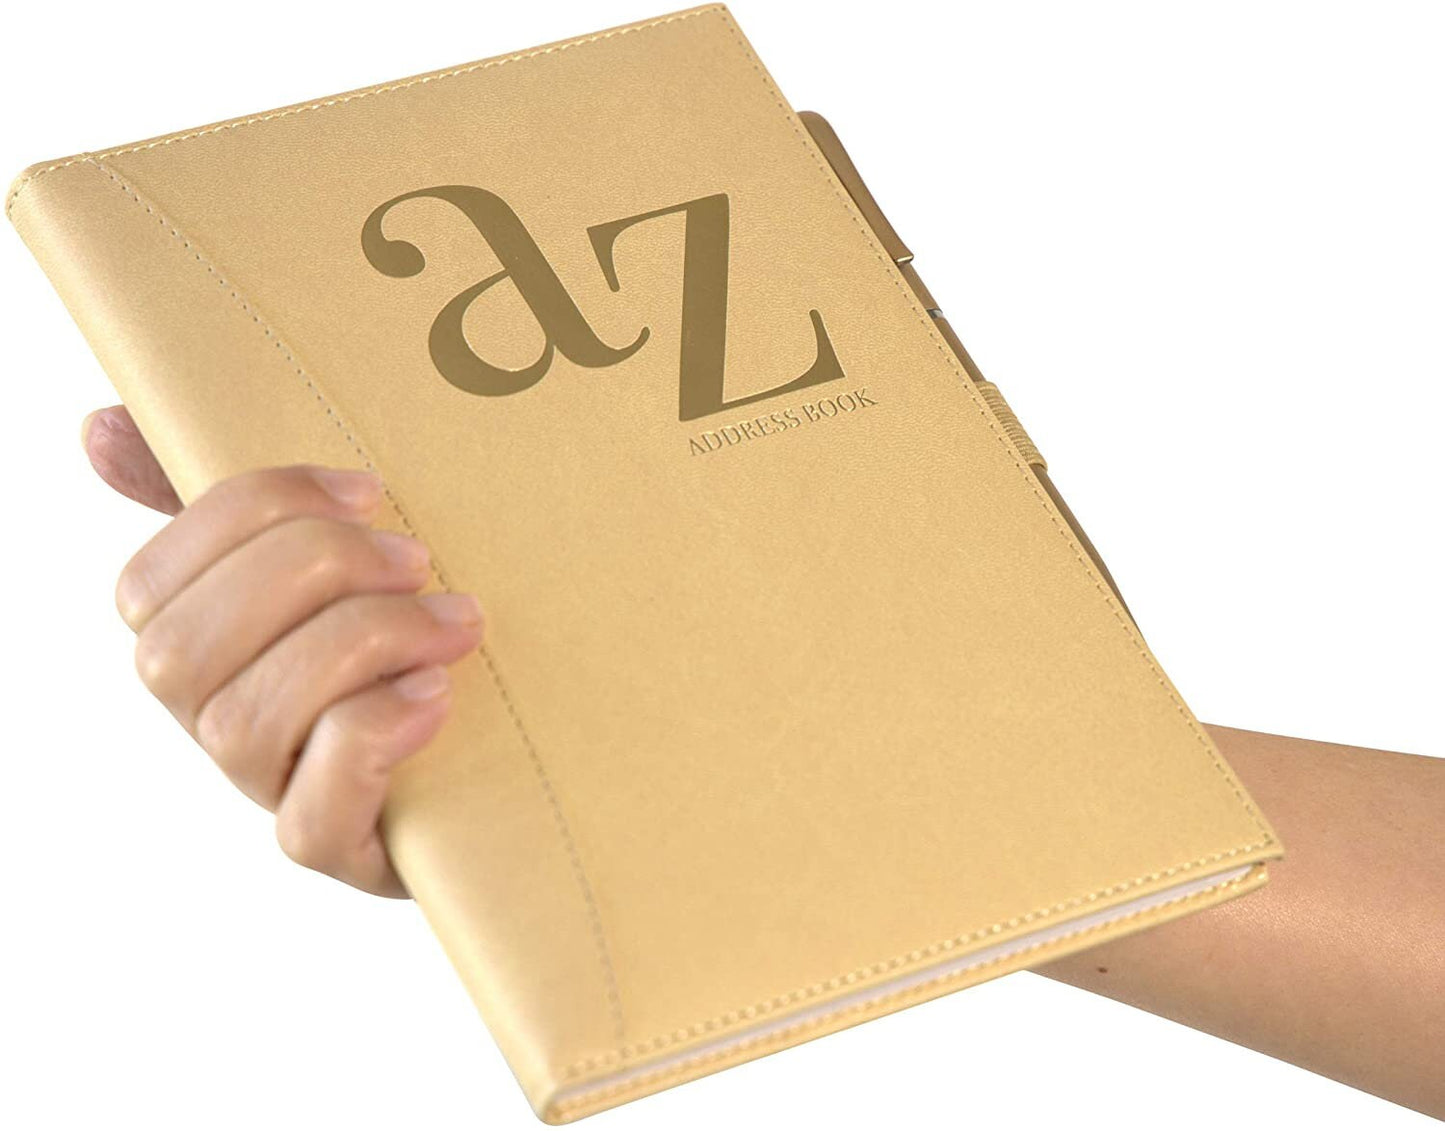 Addres Book a to z A5 Satin Fabric Address & Birthdays Book Floral Design with Magnetic Closure Flower gold Keechi & co.